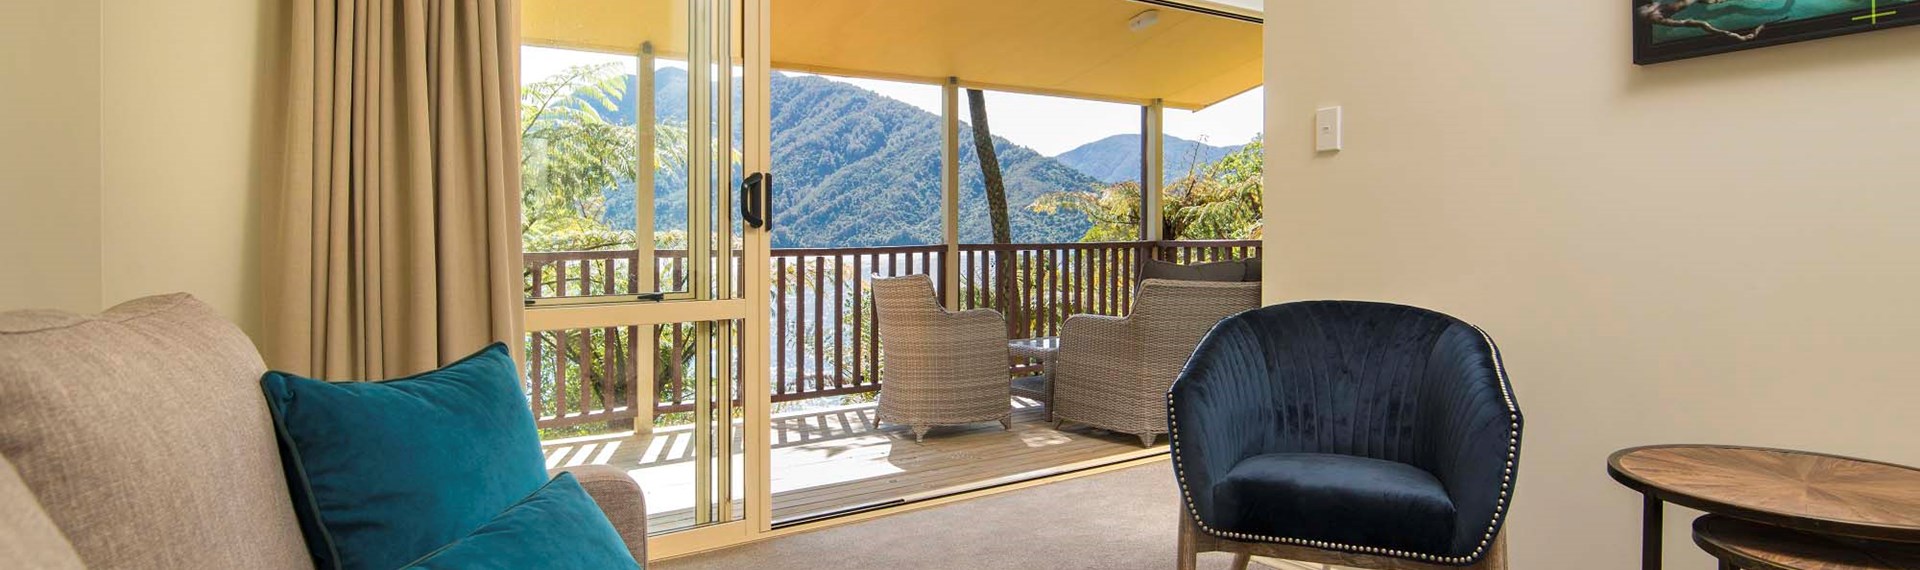 Mamaku Apartment accommodation rooms have a spacious lounge area with sofas and seating and private balcony at Punga Cove in the Marlborough Sounds in New Zealand's top of the South Island